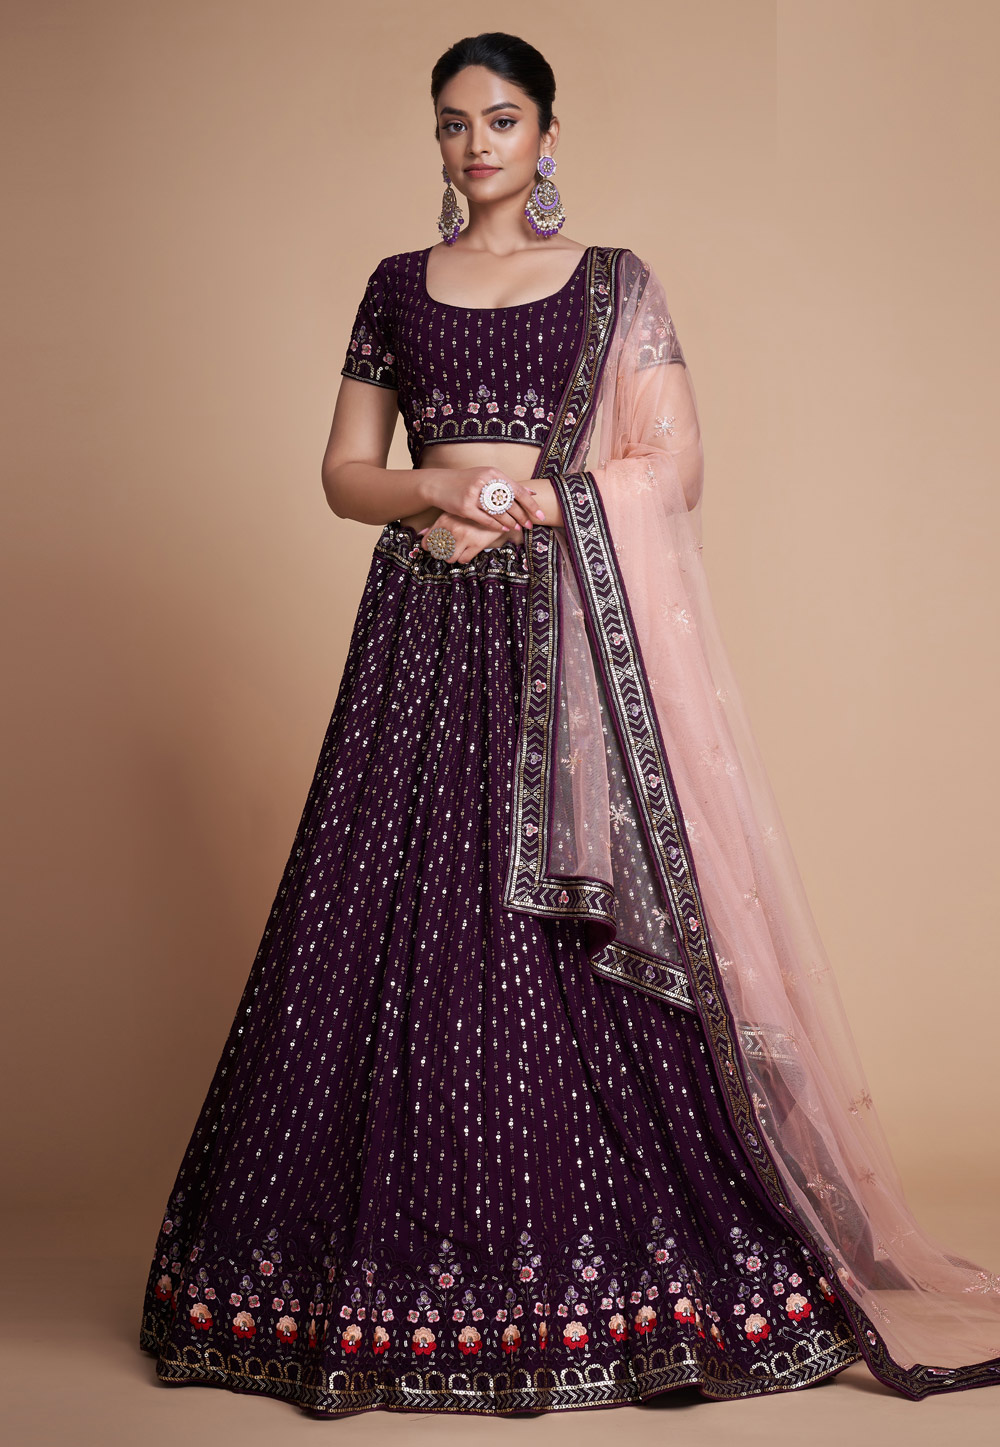 Buy 38/S-2 Size 5 to 10% Discount on Sangeet Lehenga Choli Online for Women  in USA